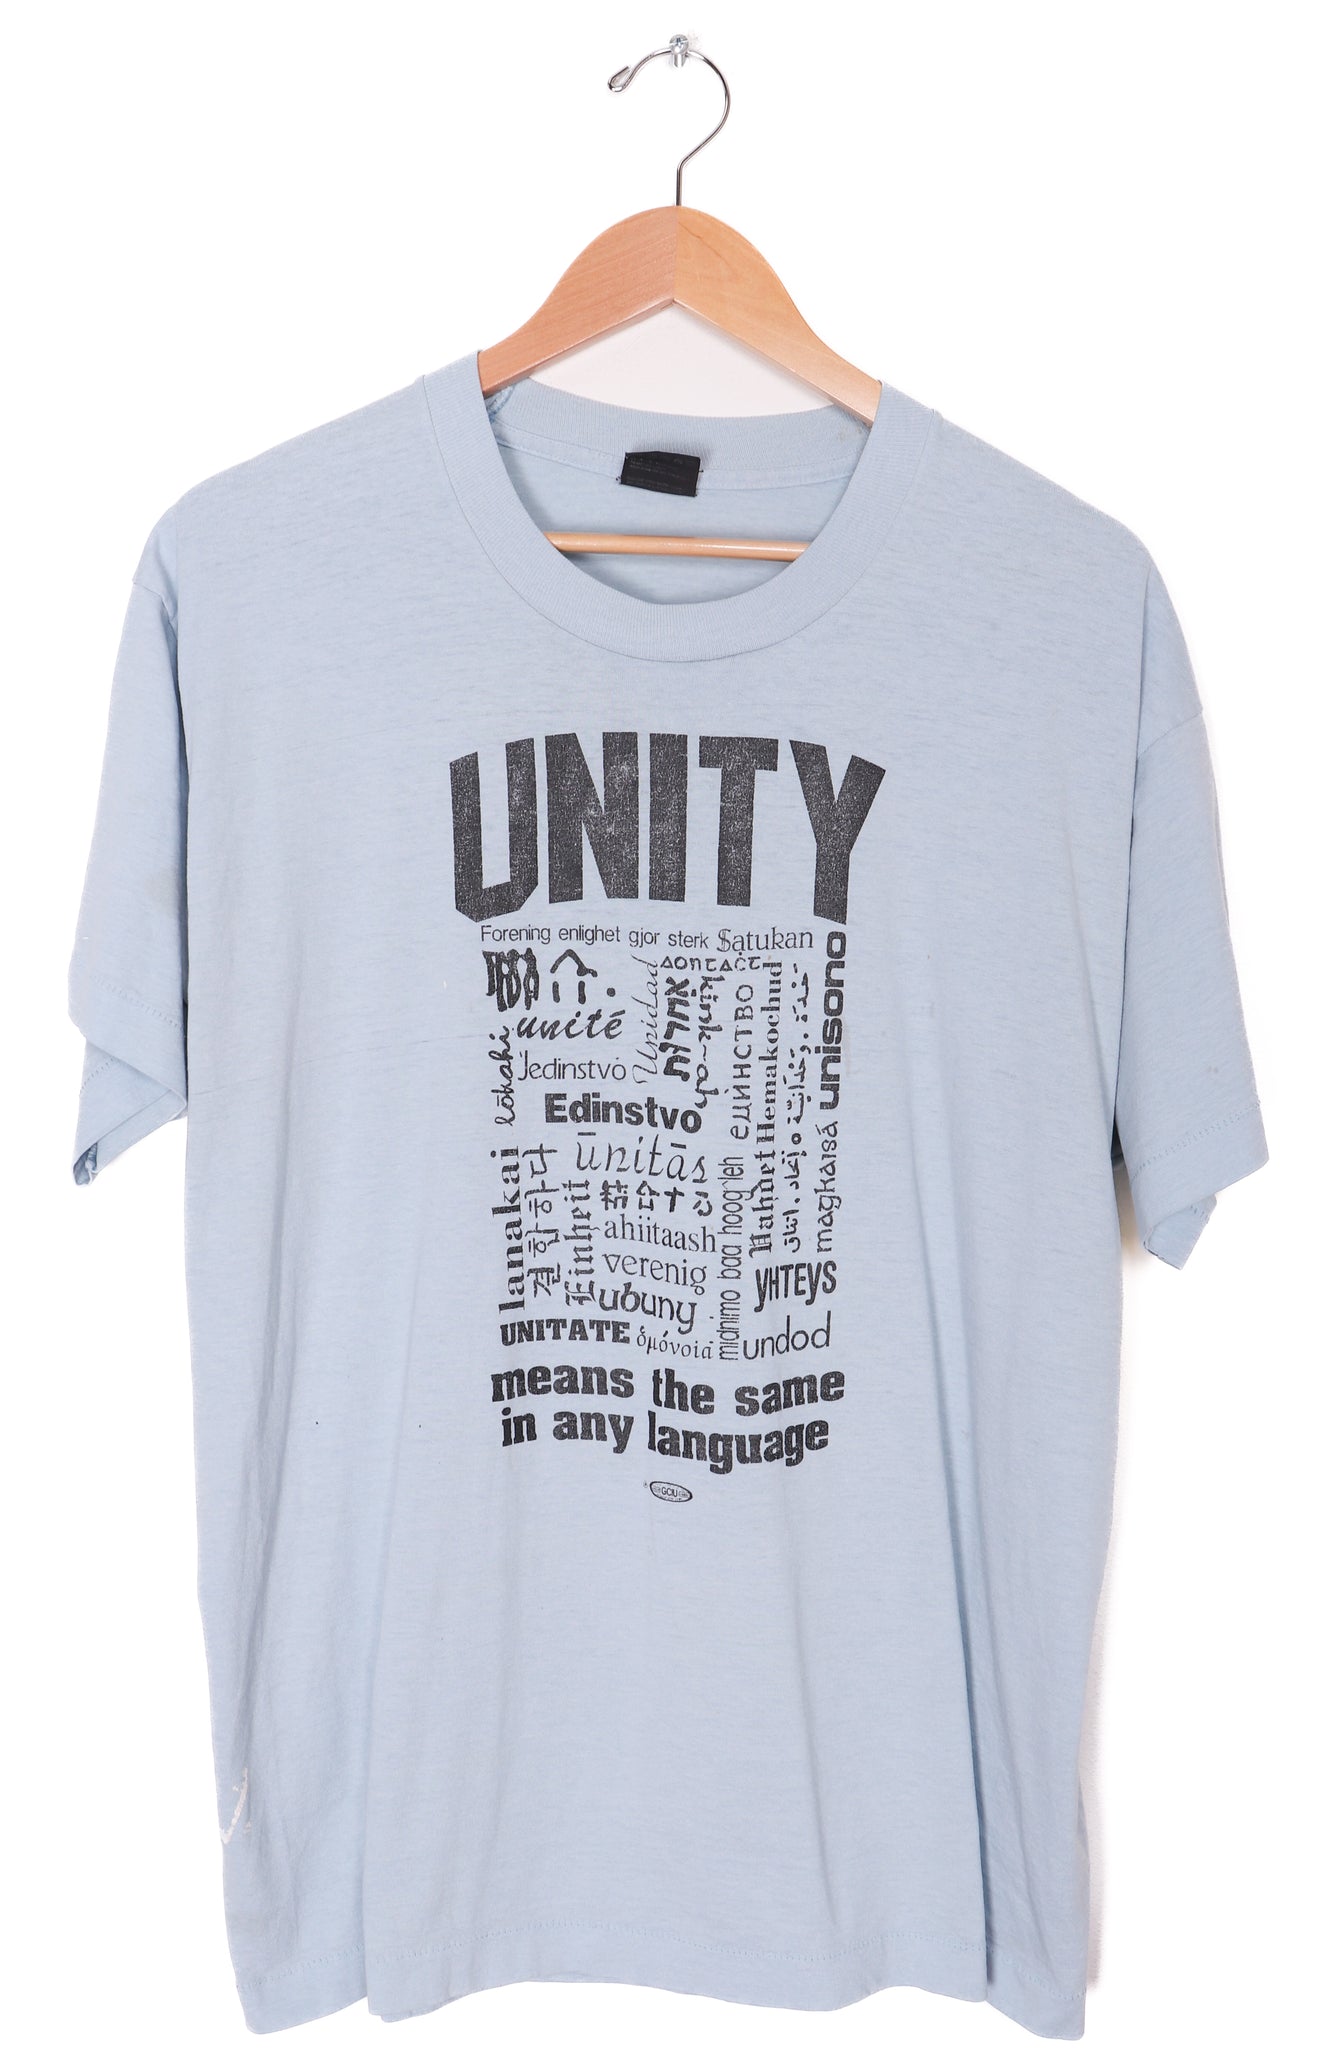 Vintage Early 90s Workers Union Unity T-Shirt